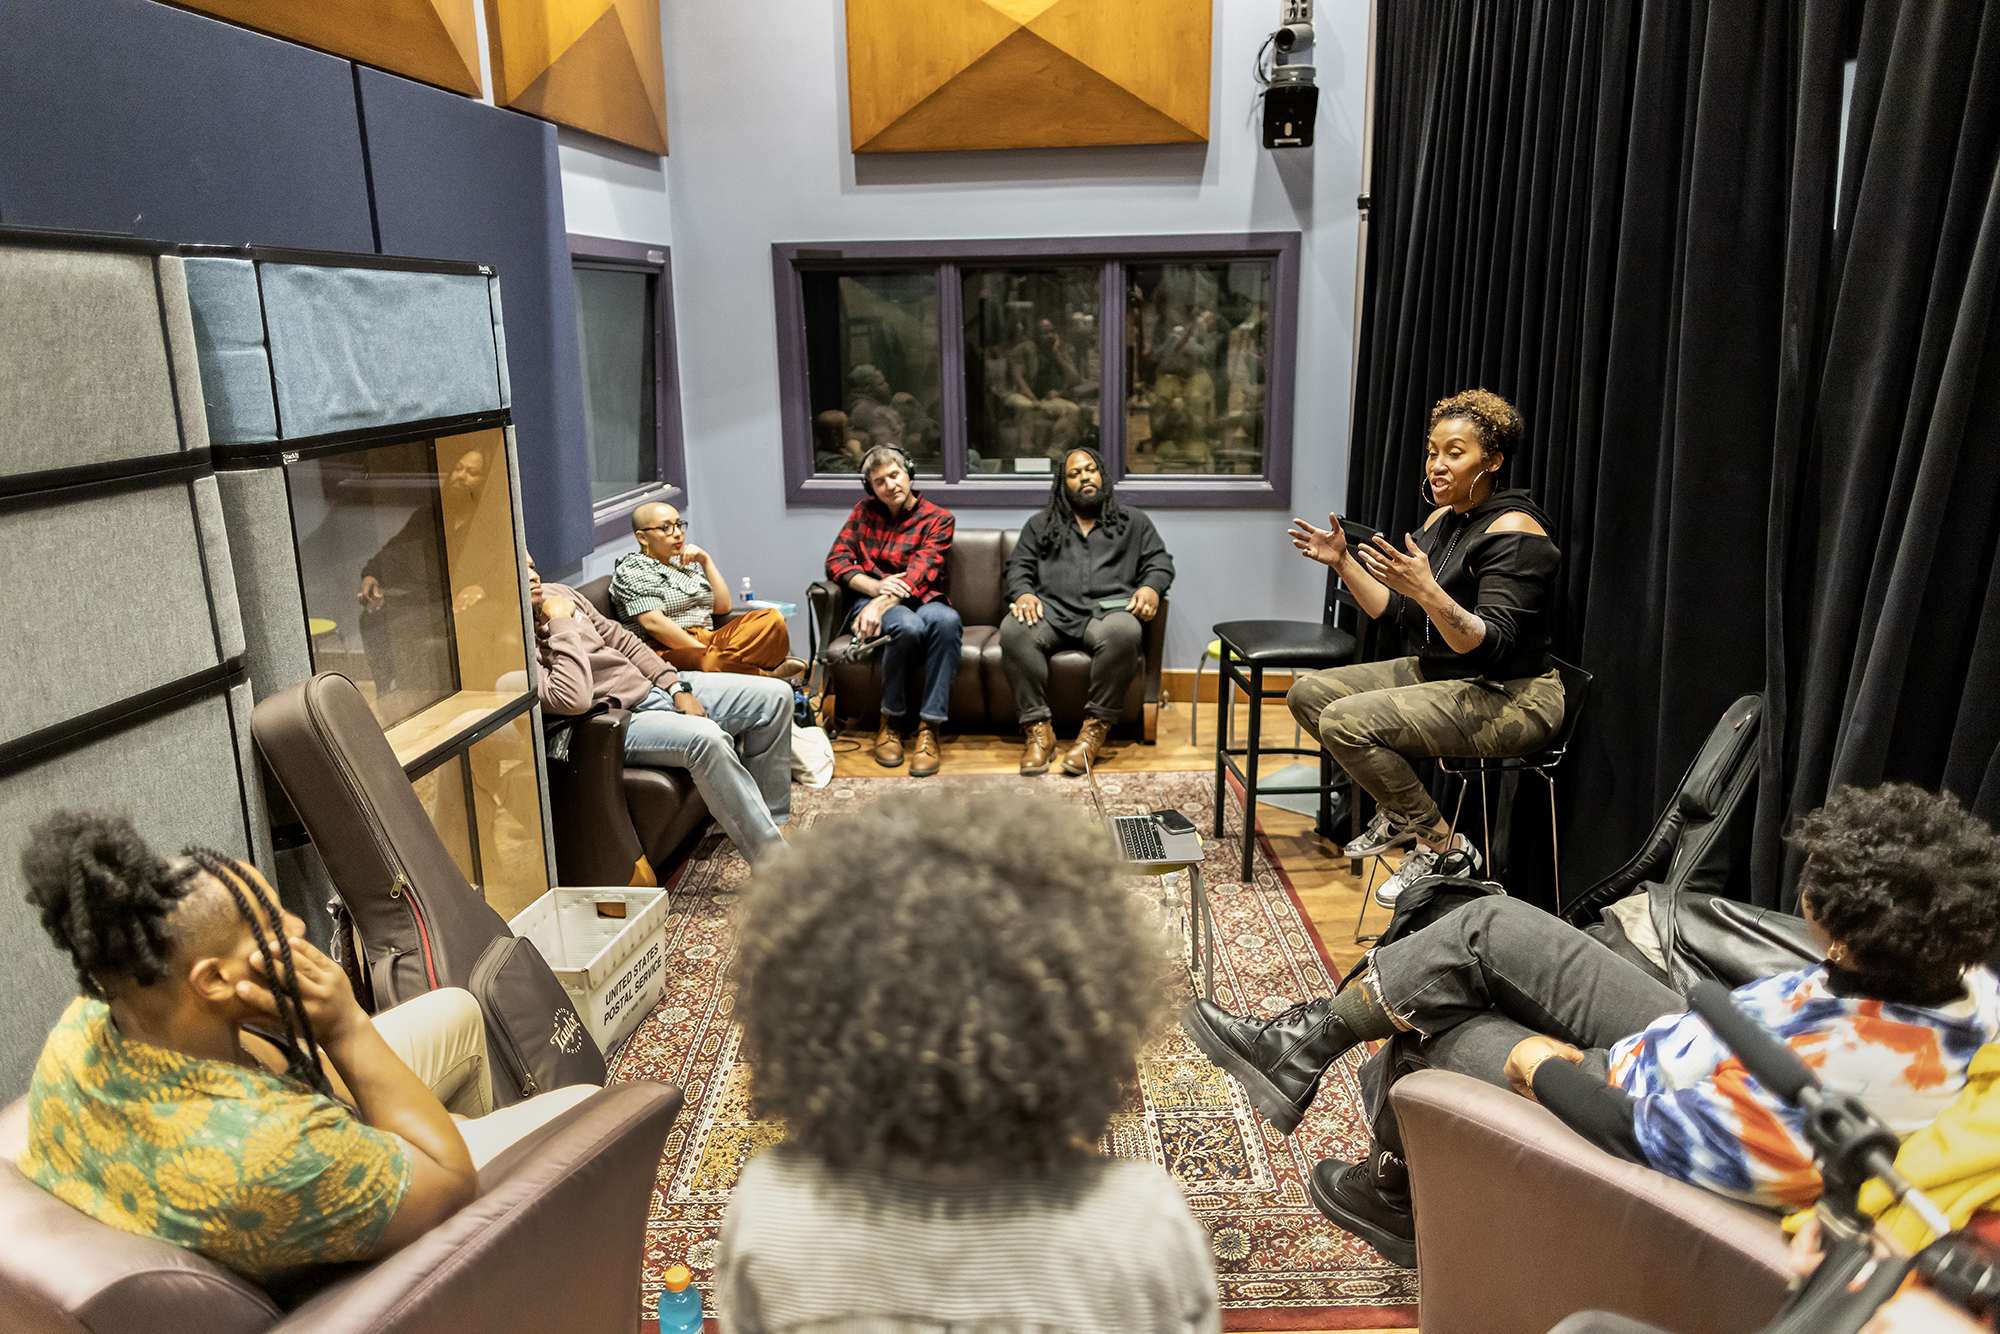 A person on a stool speaks with seven people seated in an office at WXPN.